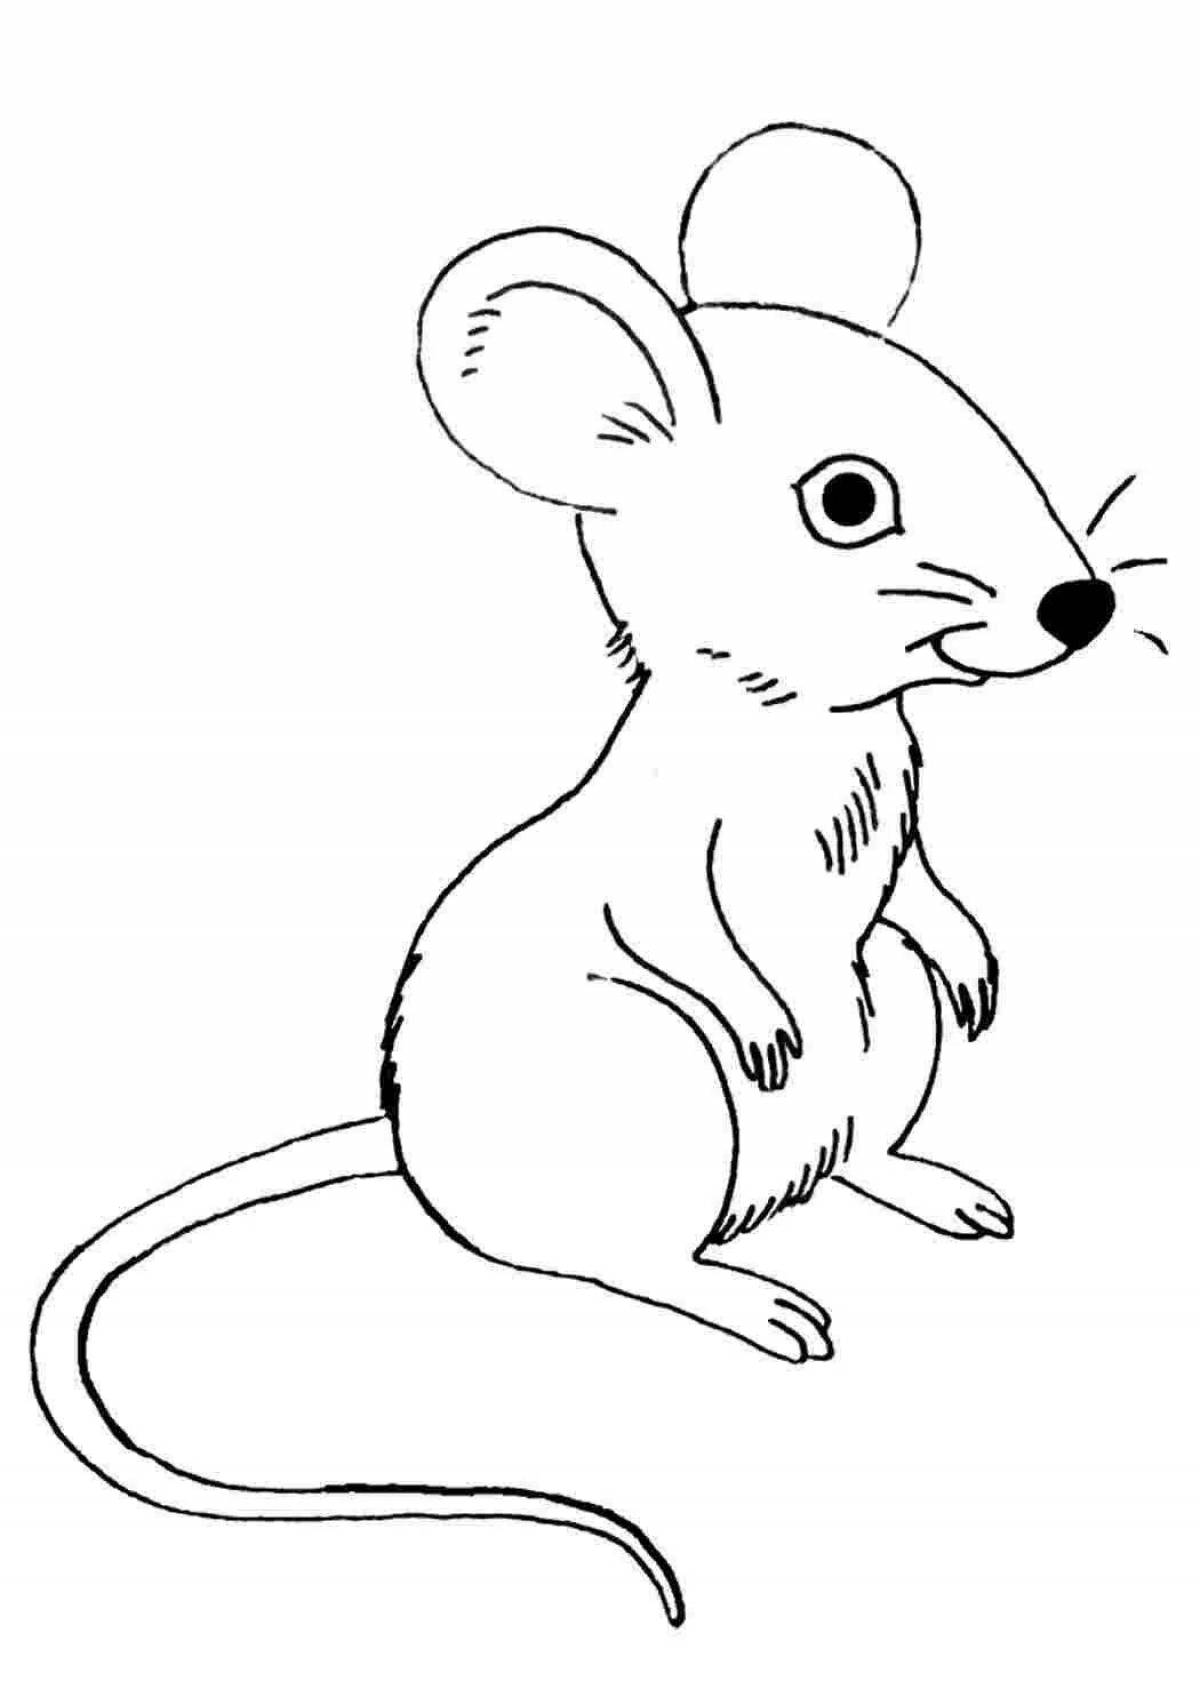 Fun coloring book with mouse